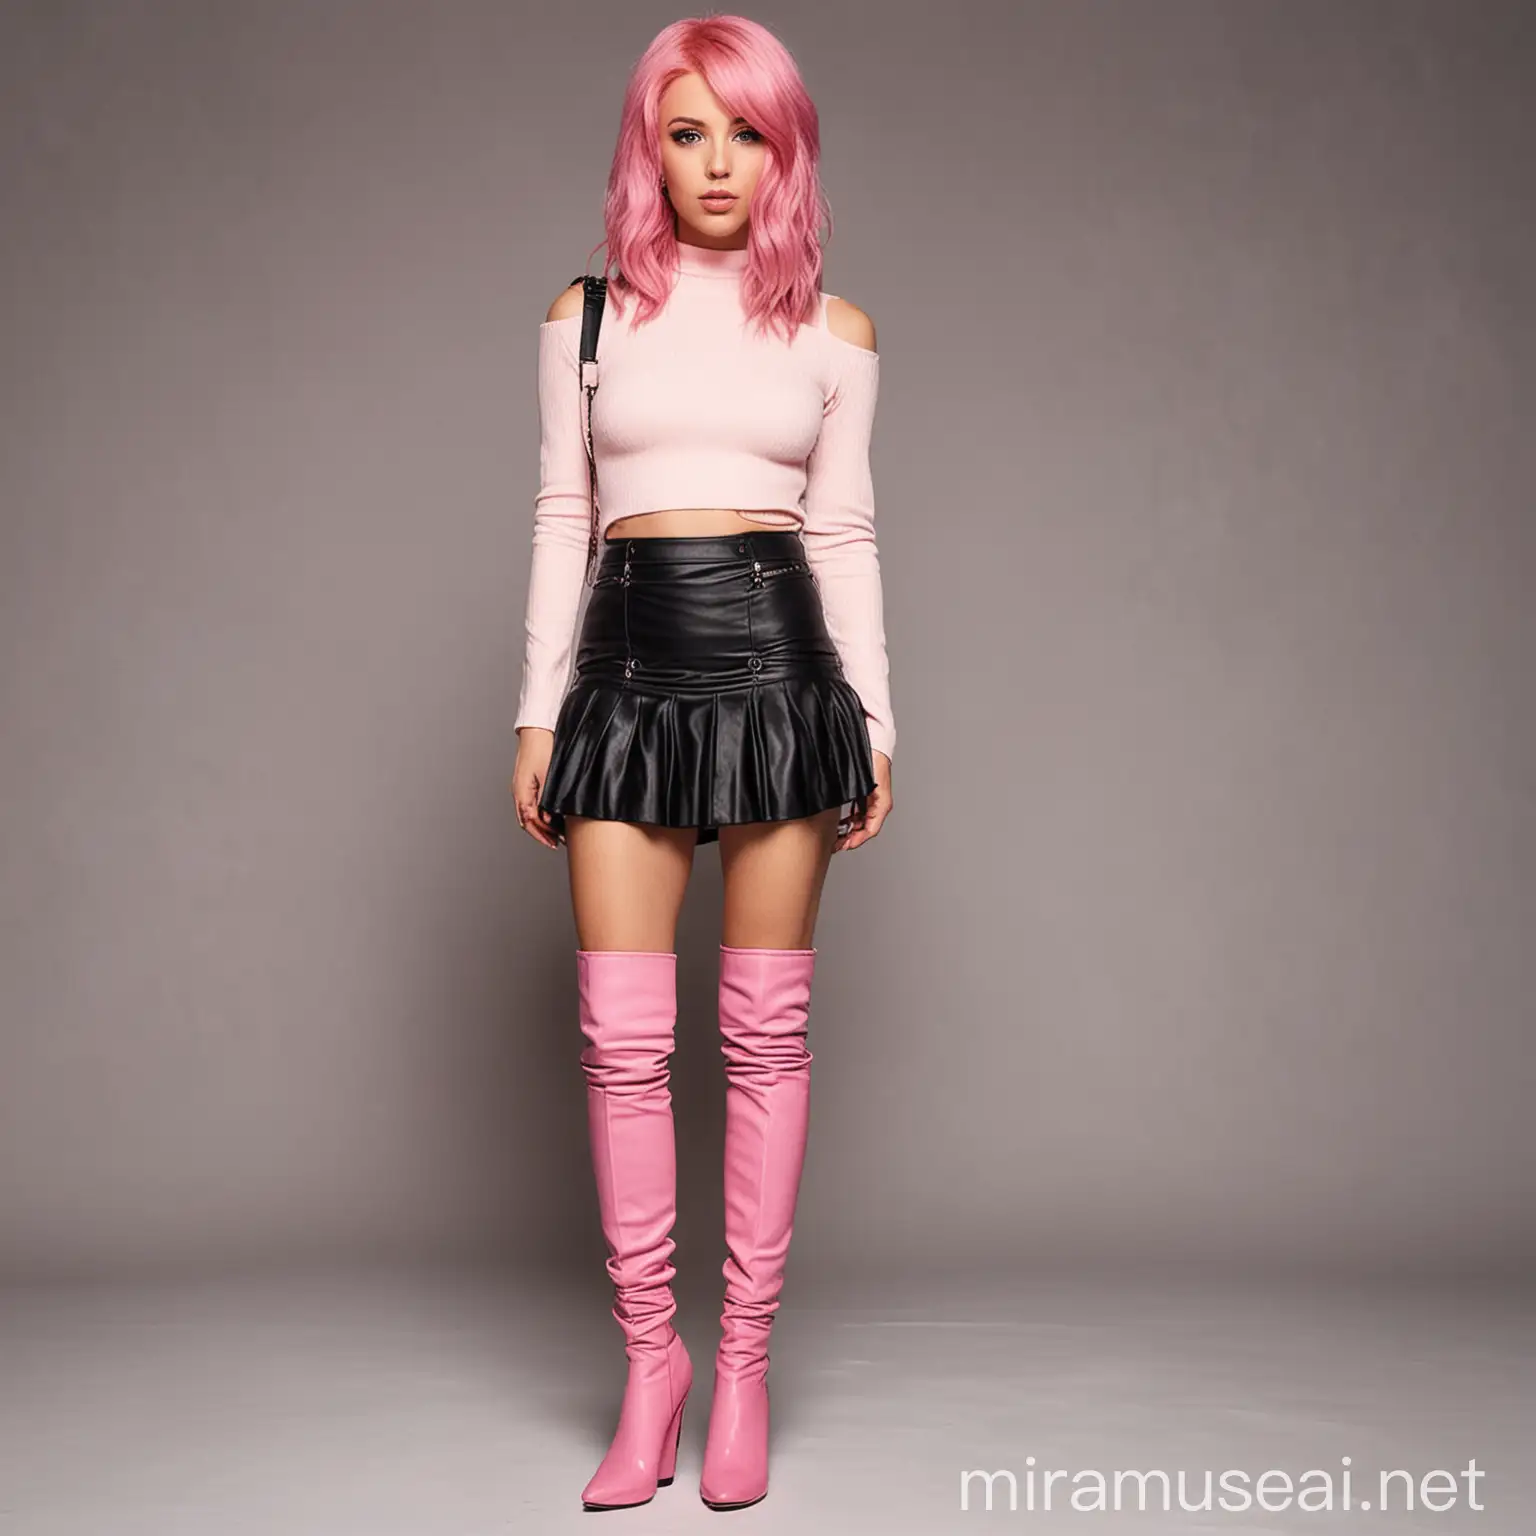 Edgy Woman in Pink Hair ThighHigh Boots and Short Skirt Stands Out in Urban Setting